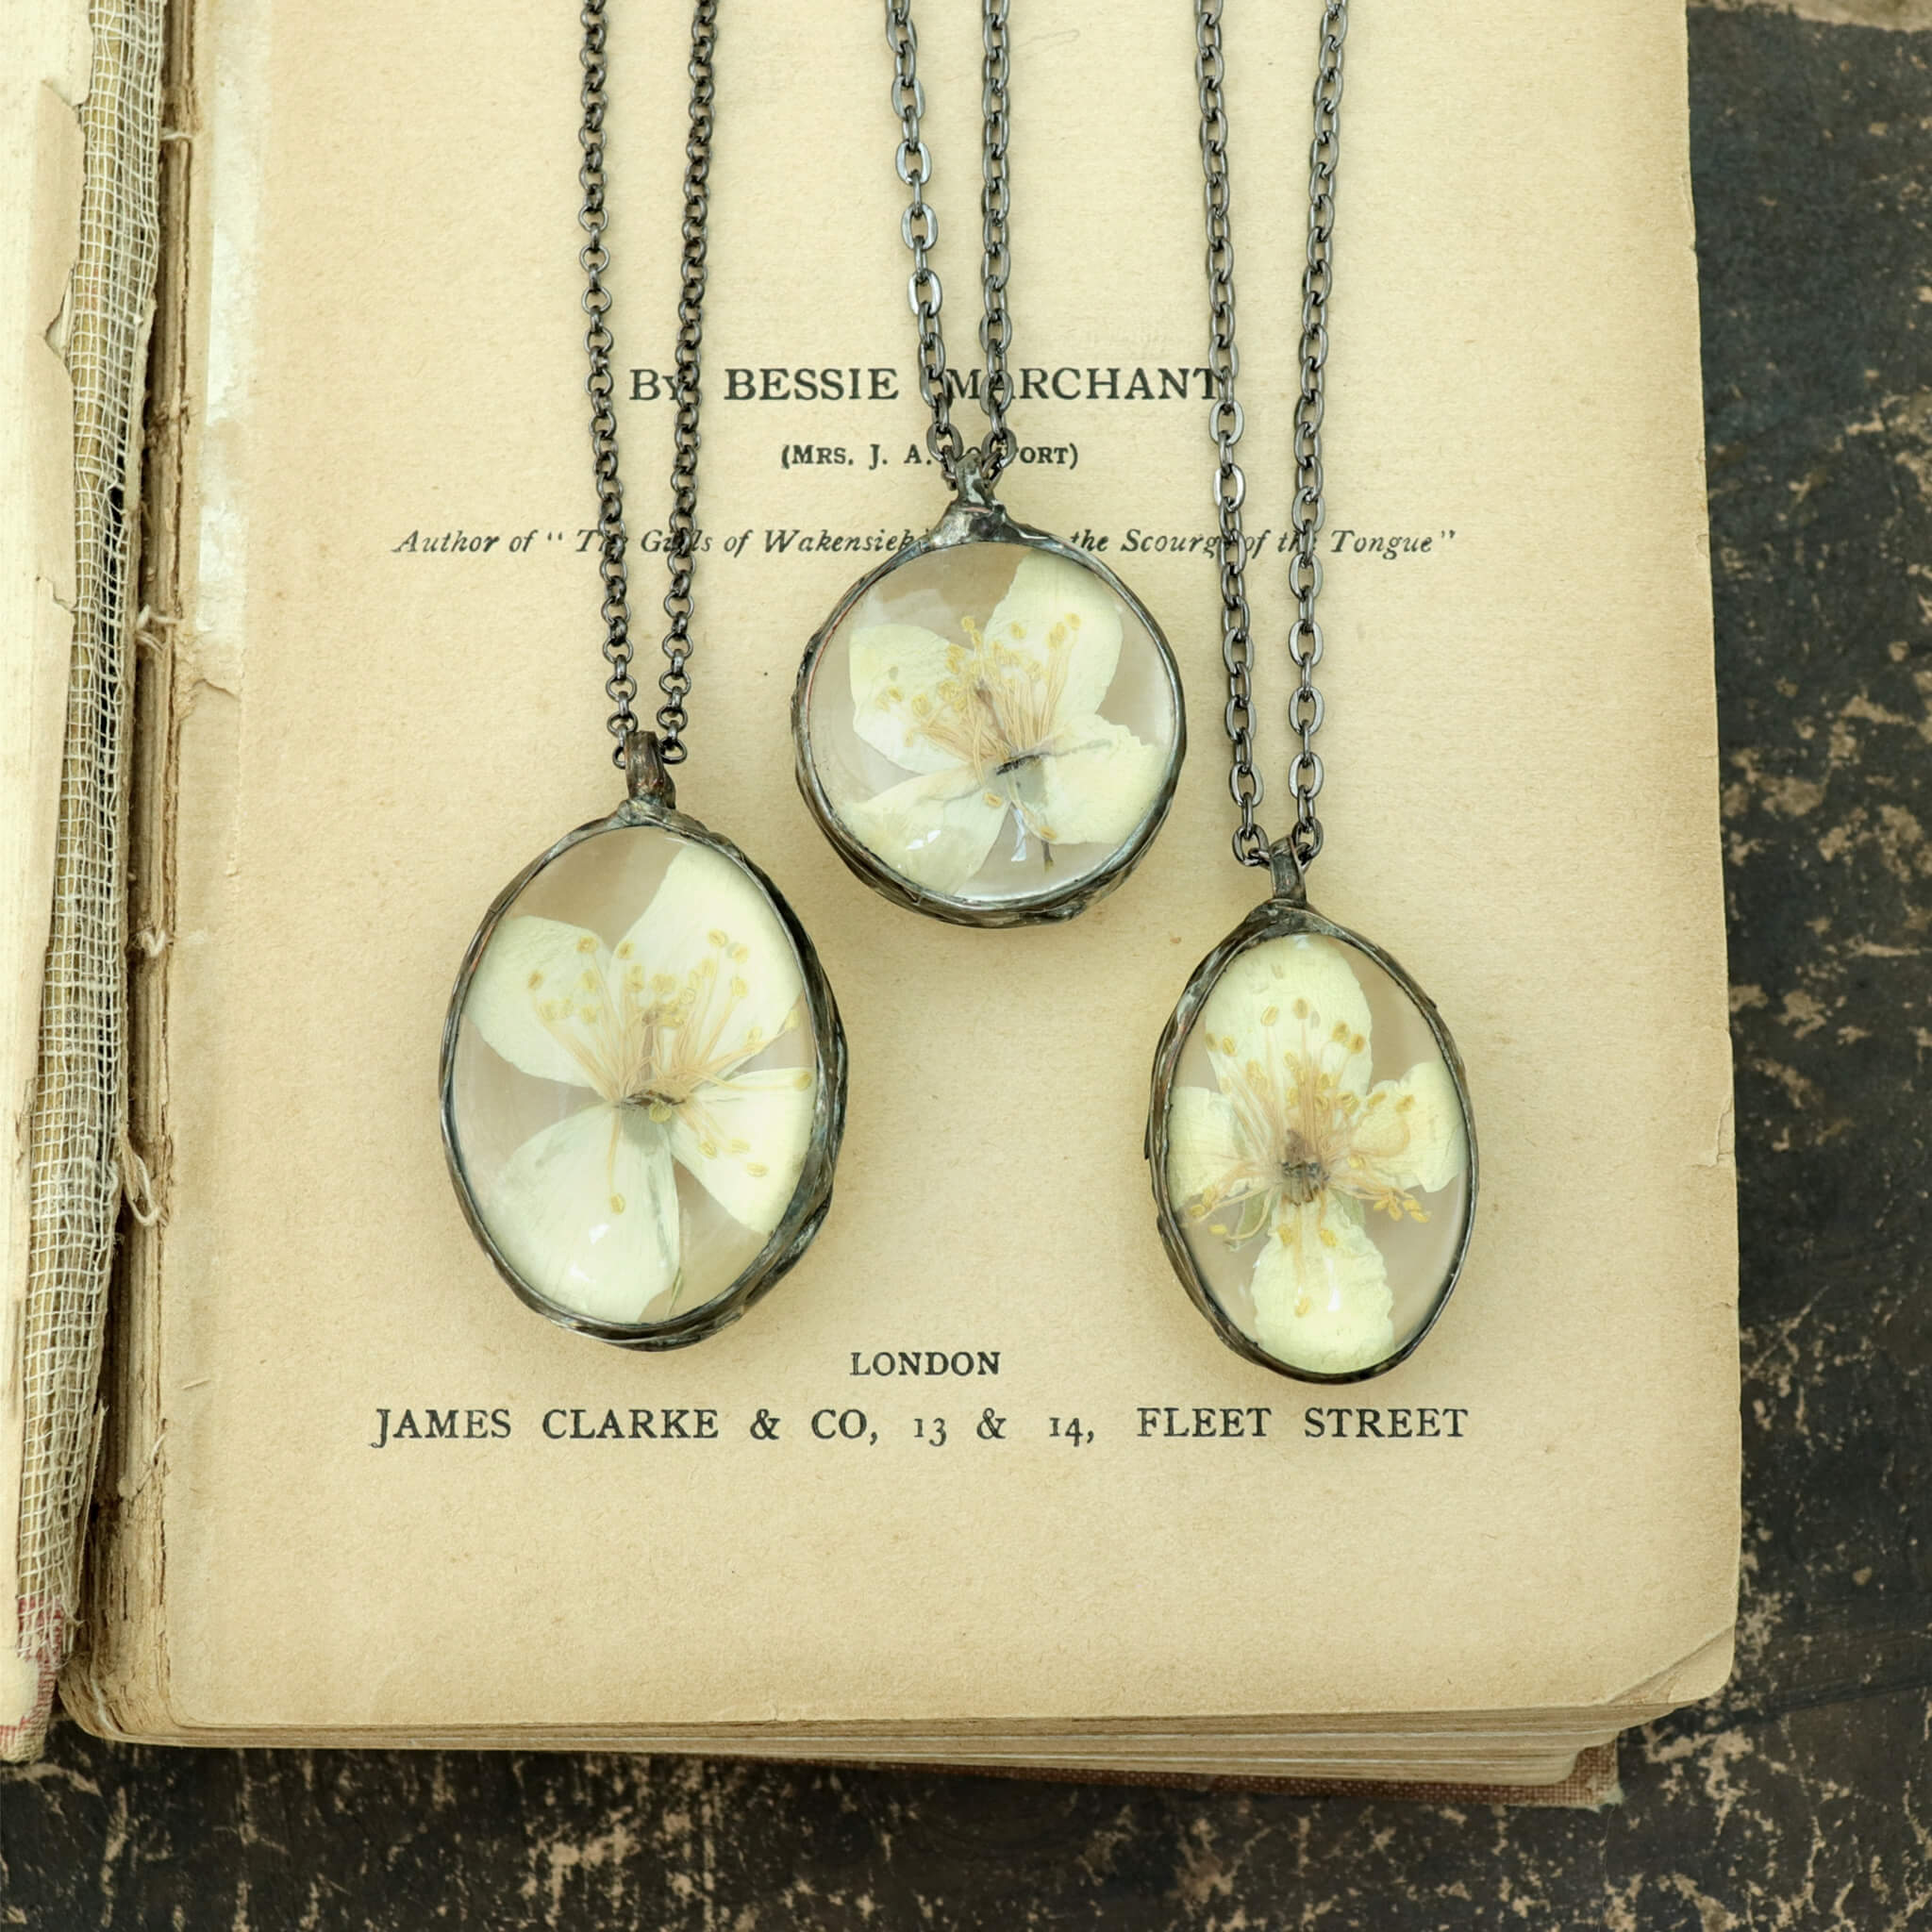 Three jasmine necklaces lying side by side on a vintage book